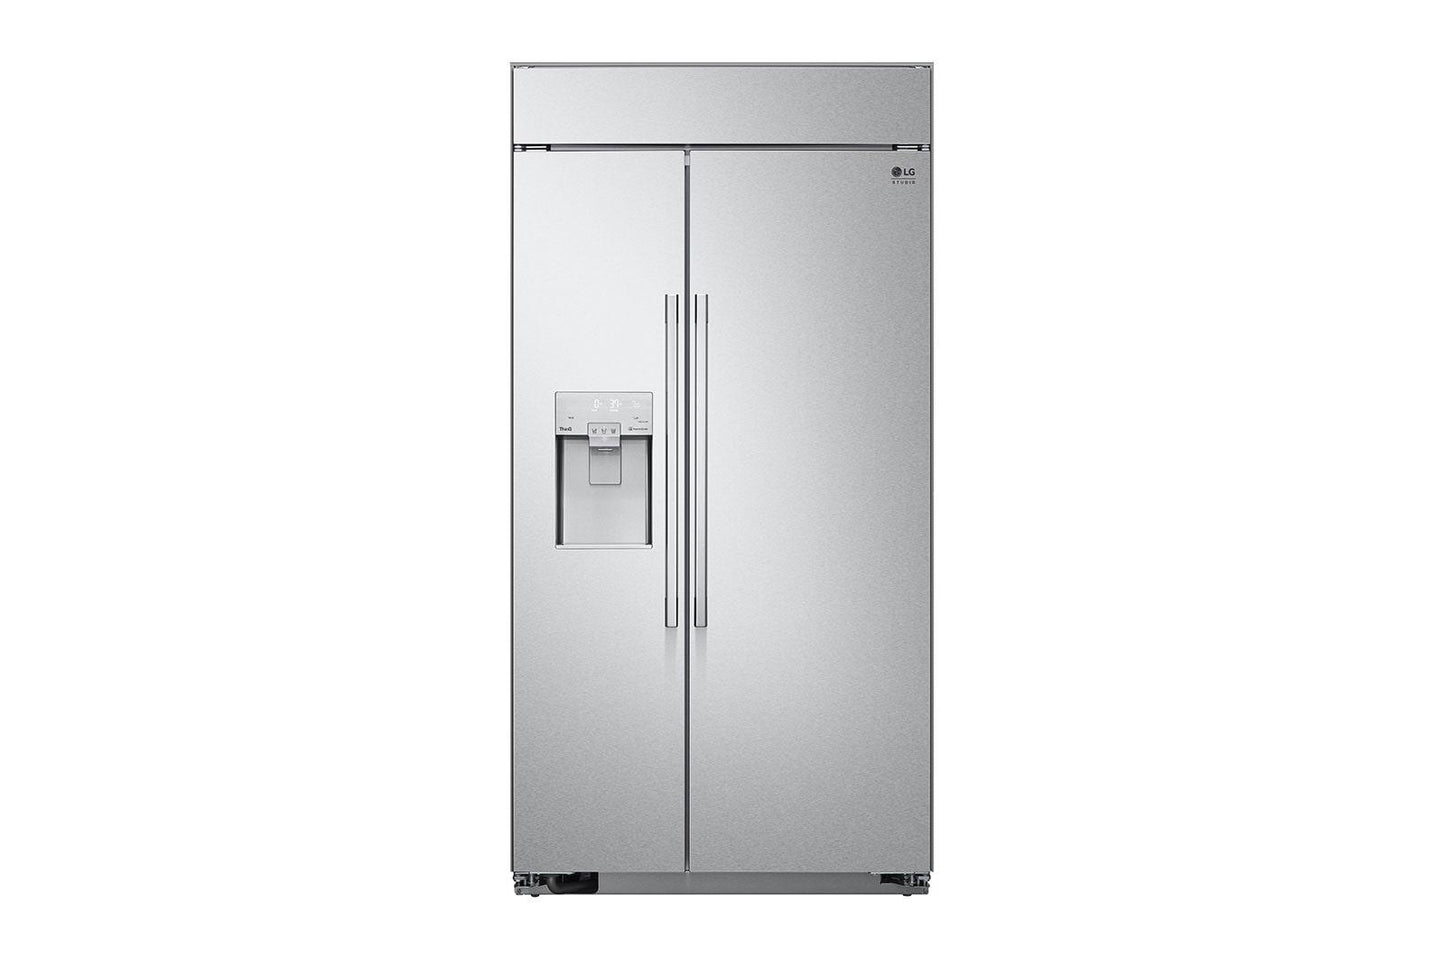 Lg SRSXB2622S Lg Studio 26 Cu. Ft. Smart Side-By-Side Built-In Refrigerator With Ice & Water Dispenser